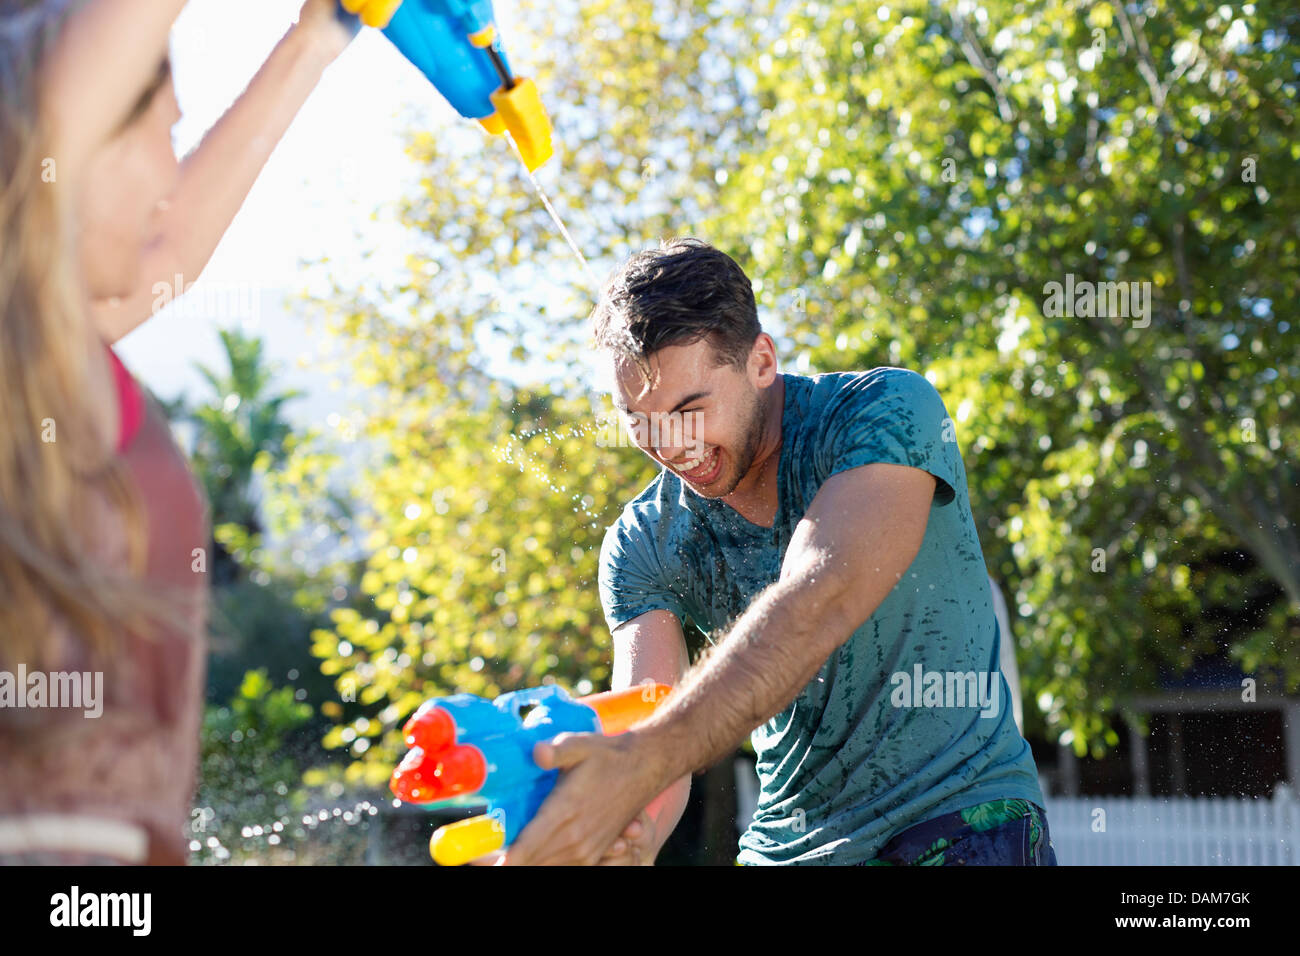 Couple playing with water guns in backyard Stock Photo